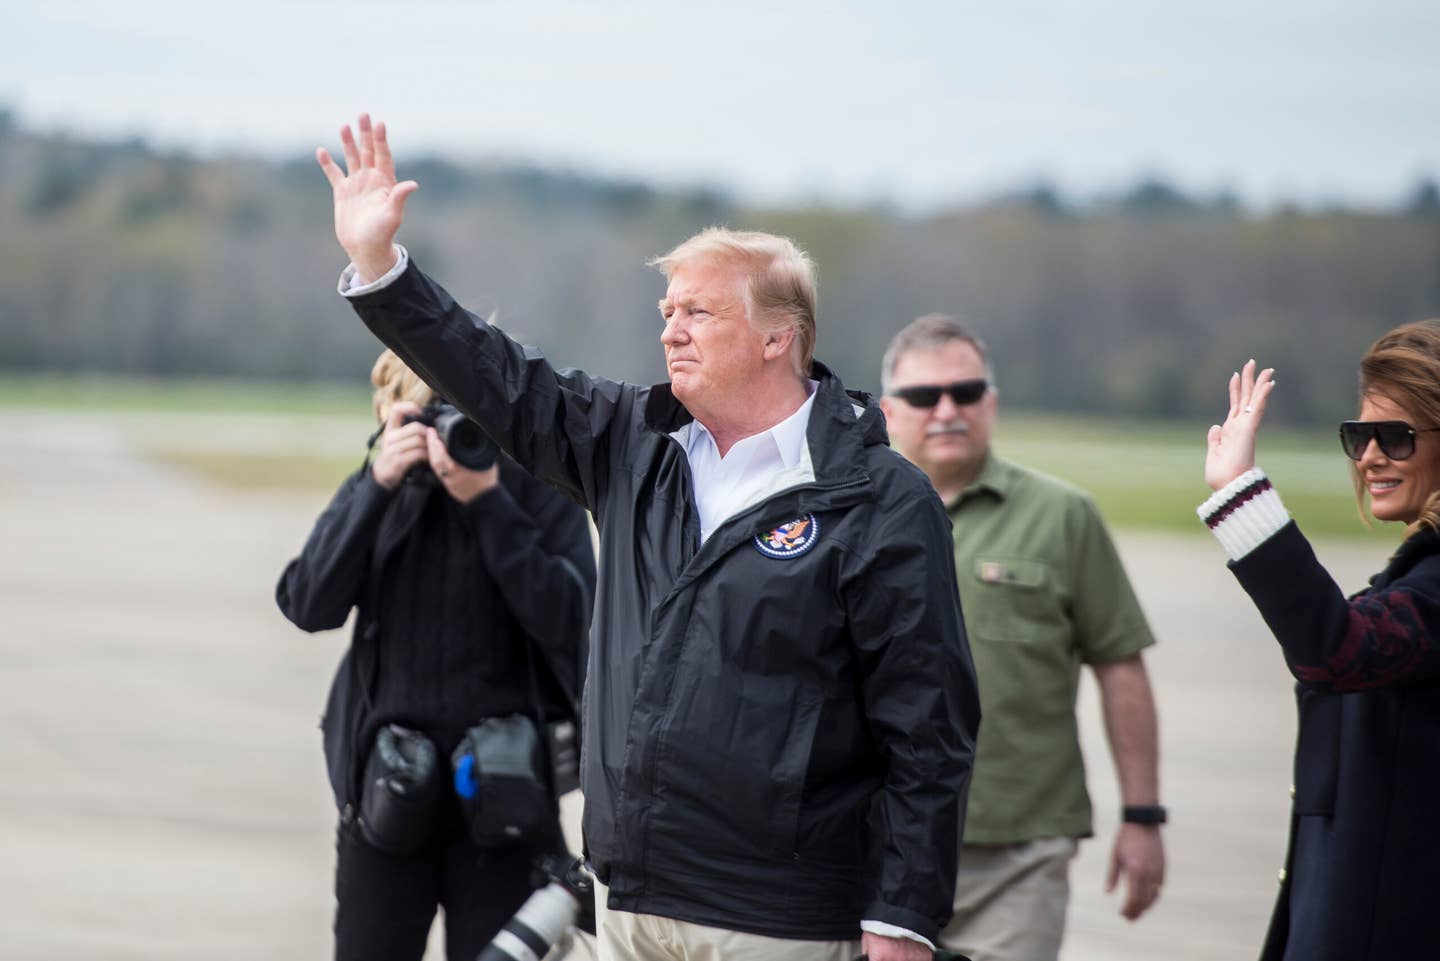 FORT BENNING, Ga. – President Donald J. Trump and first lady Melania Trump landed at Lawson Army Airfield March 8 in Air Force One before flying in Marine One to Lee County, Alabama, where March 3 storms and tornadoes killed 23 people and caused major damage.  Before departing to Alabama, the president met with Maj. Gen. Gary M. Brito, the Maneuver Center of Excellence and Fort Benning commanding general, and with Georgia Governor Brian Kemp on the airfield flightline. (U.S. Army photo by Patrick Albright, Maneuver Center of Excellence, Fort Benning Public Affairs)